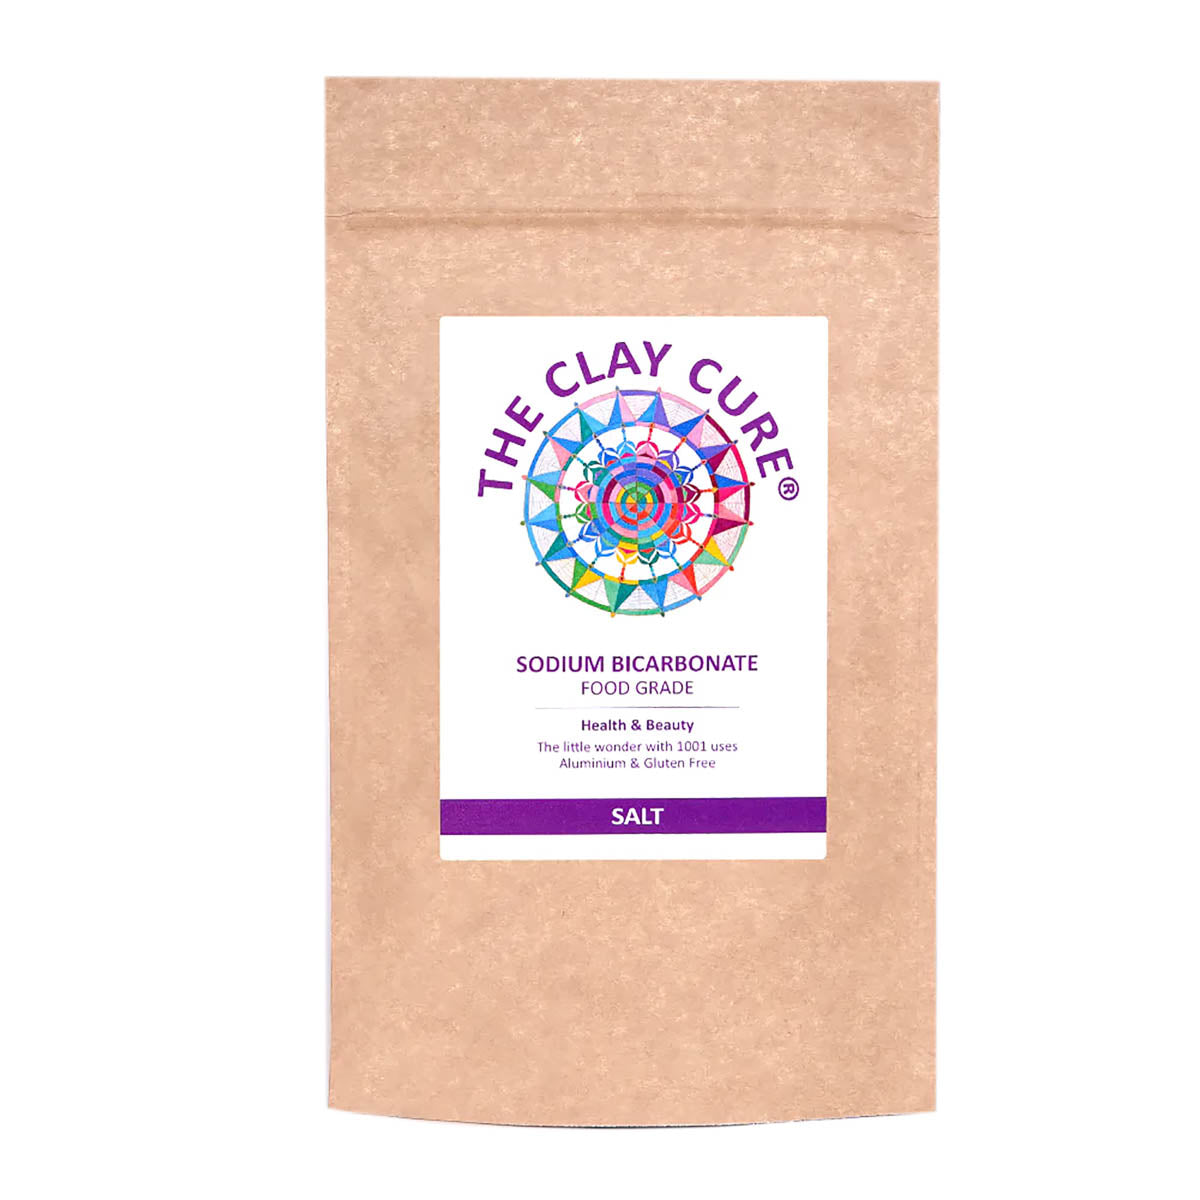 The Clay Cure - Food-Grade Sodium Bicarbonate (1kg)